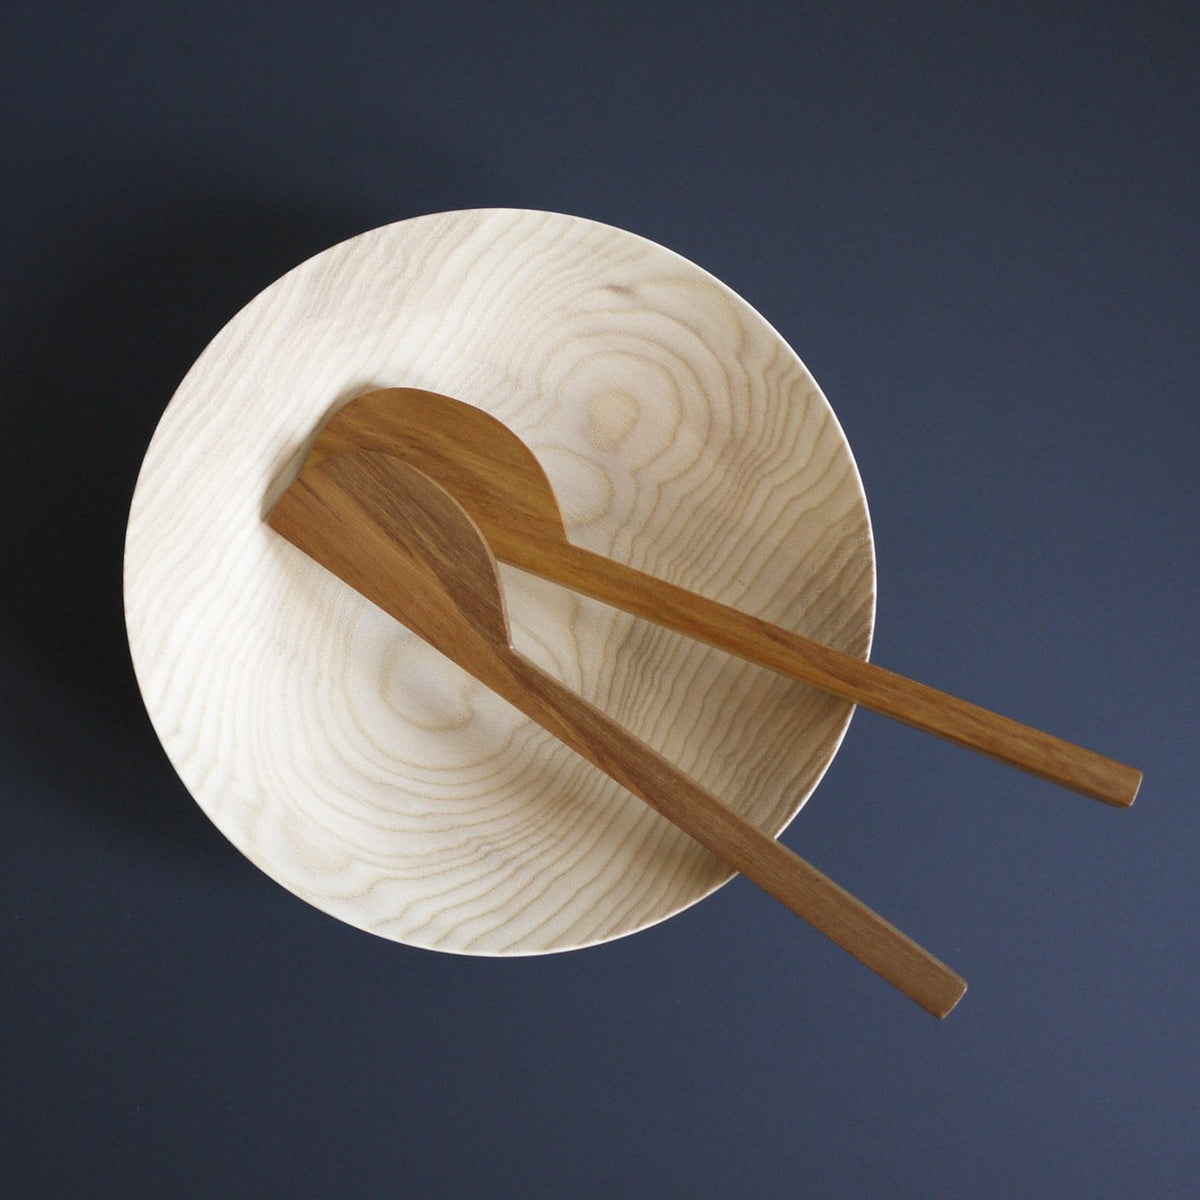 Two Kihachi wooden spoons in a Kihachi wooden bowl.